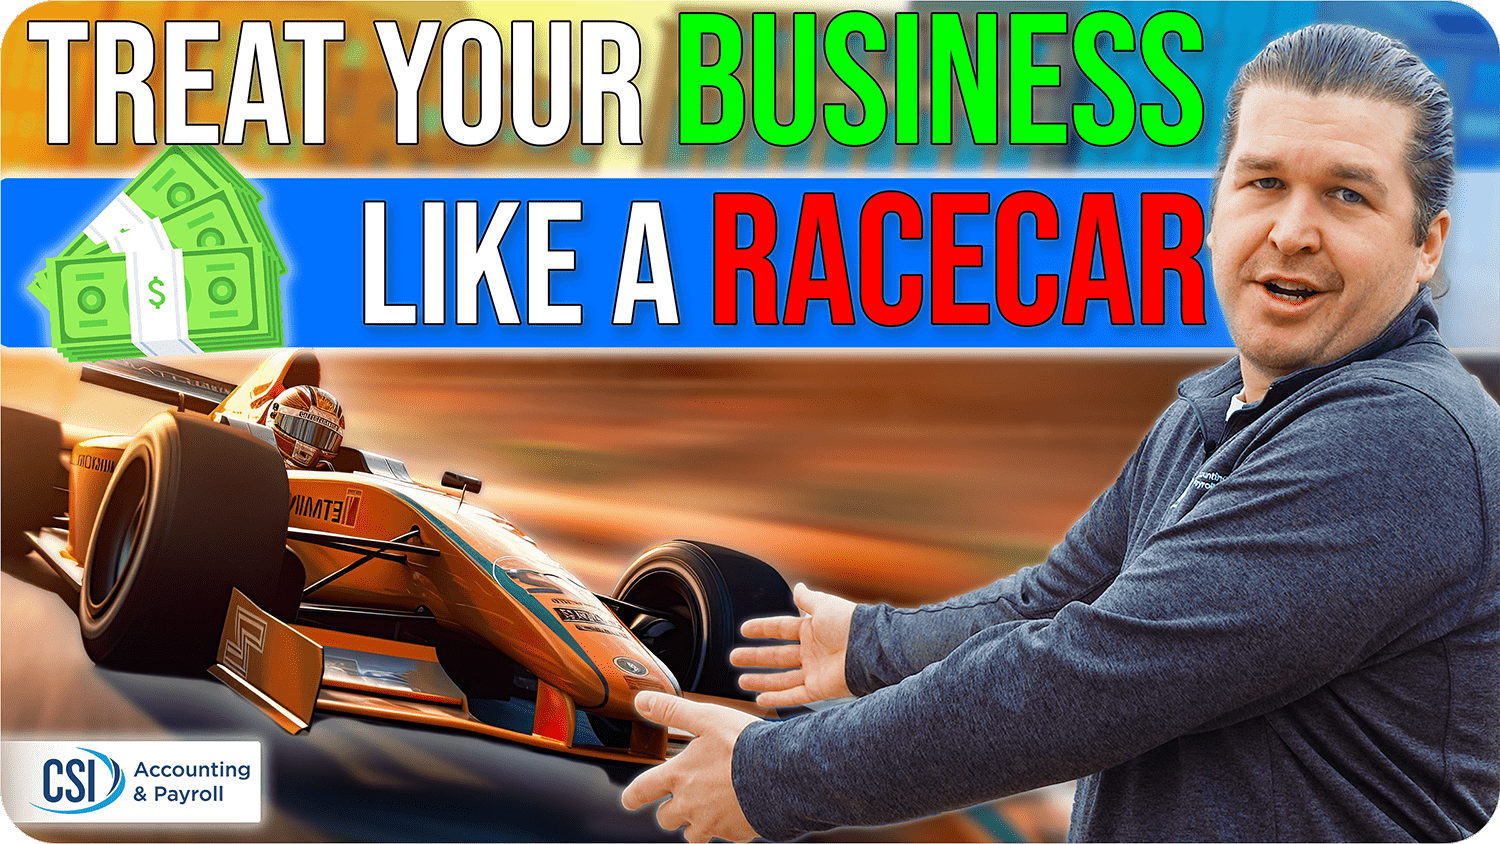 Accountant gesturing at racecar with text and cash stacks